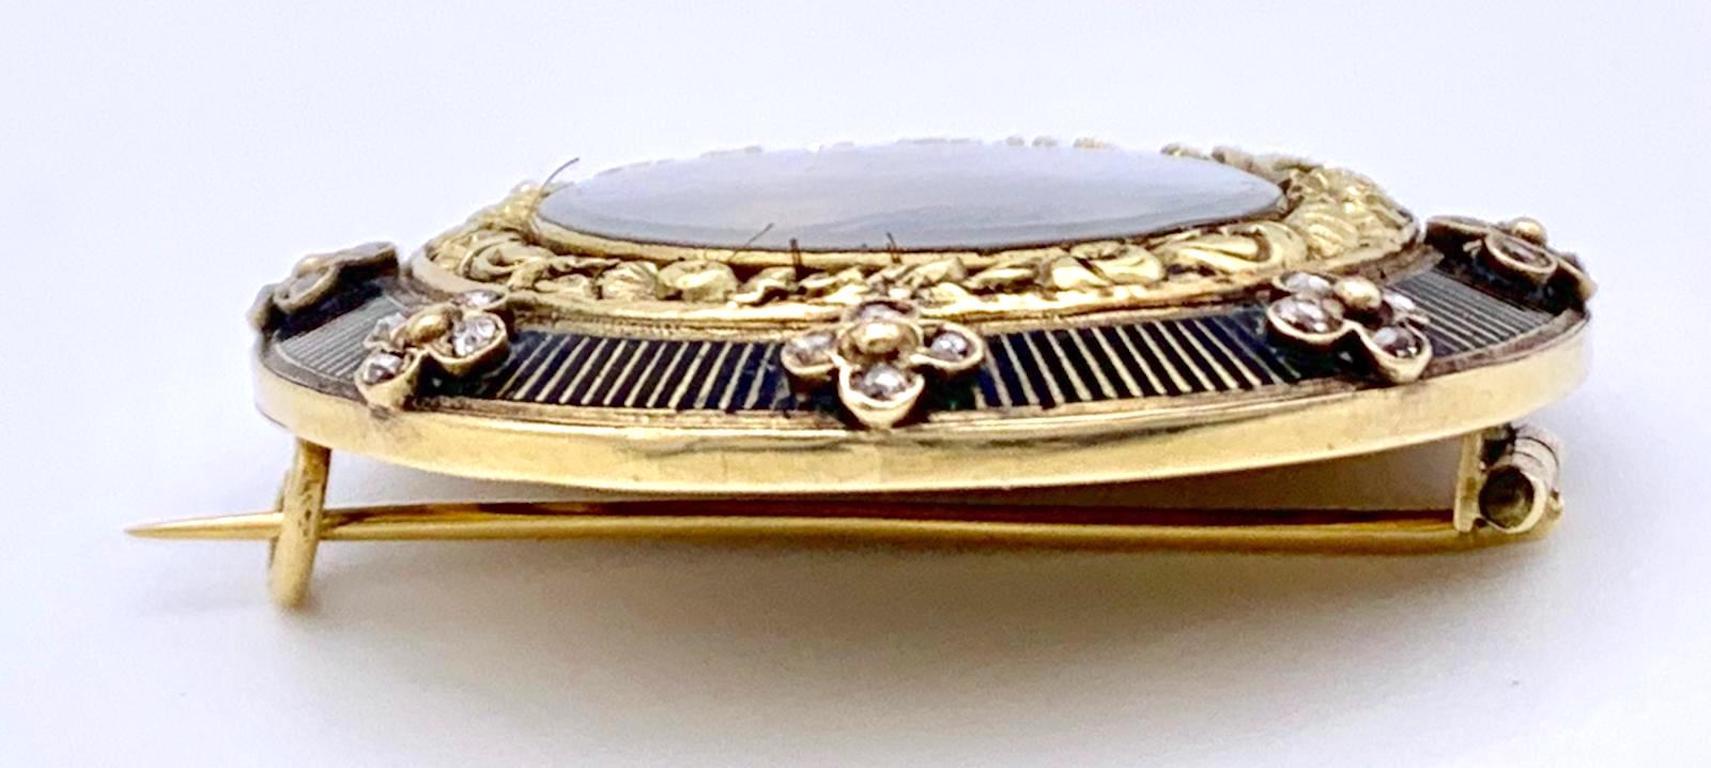 Antique memorial brooch with a pained miniature of Napoleon.
The miniature with a portrait of Napoleon in profile has been painted on card with gouache. The gold brooch is decorated with black enamelled stripes and applicated flowers set with four